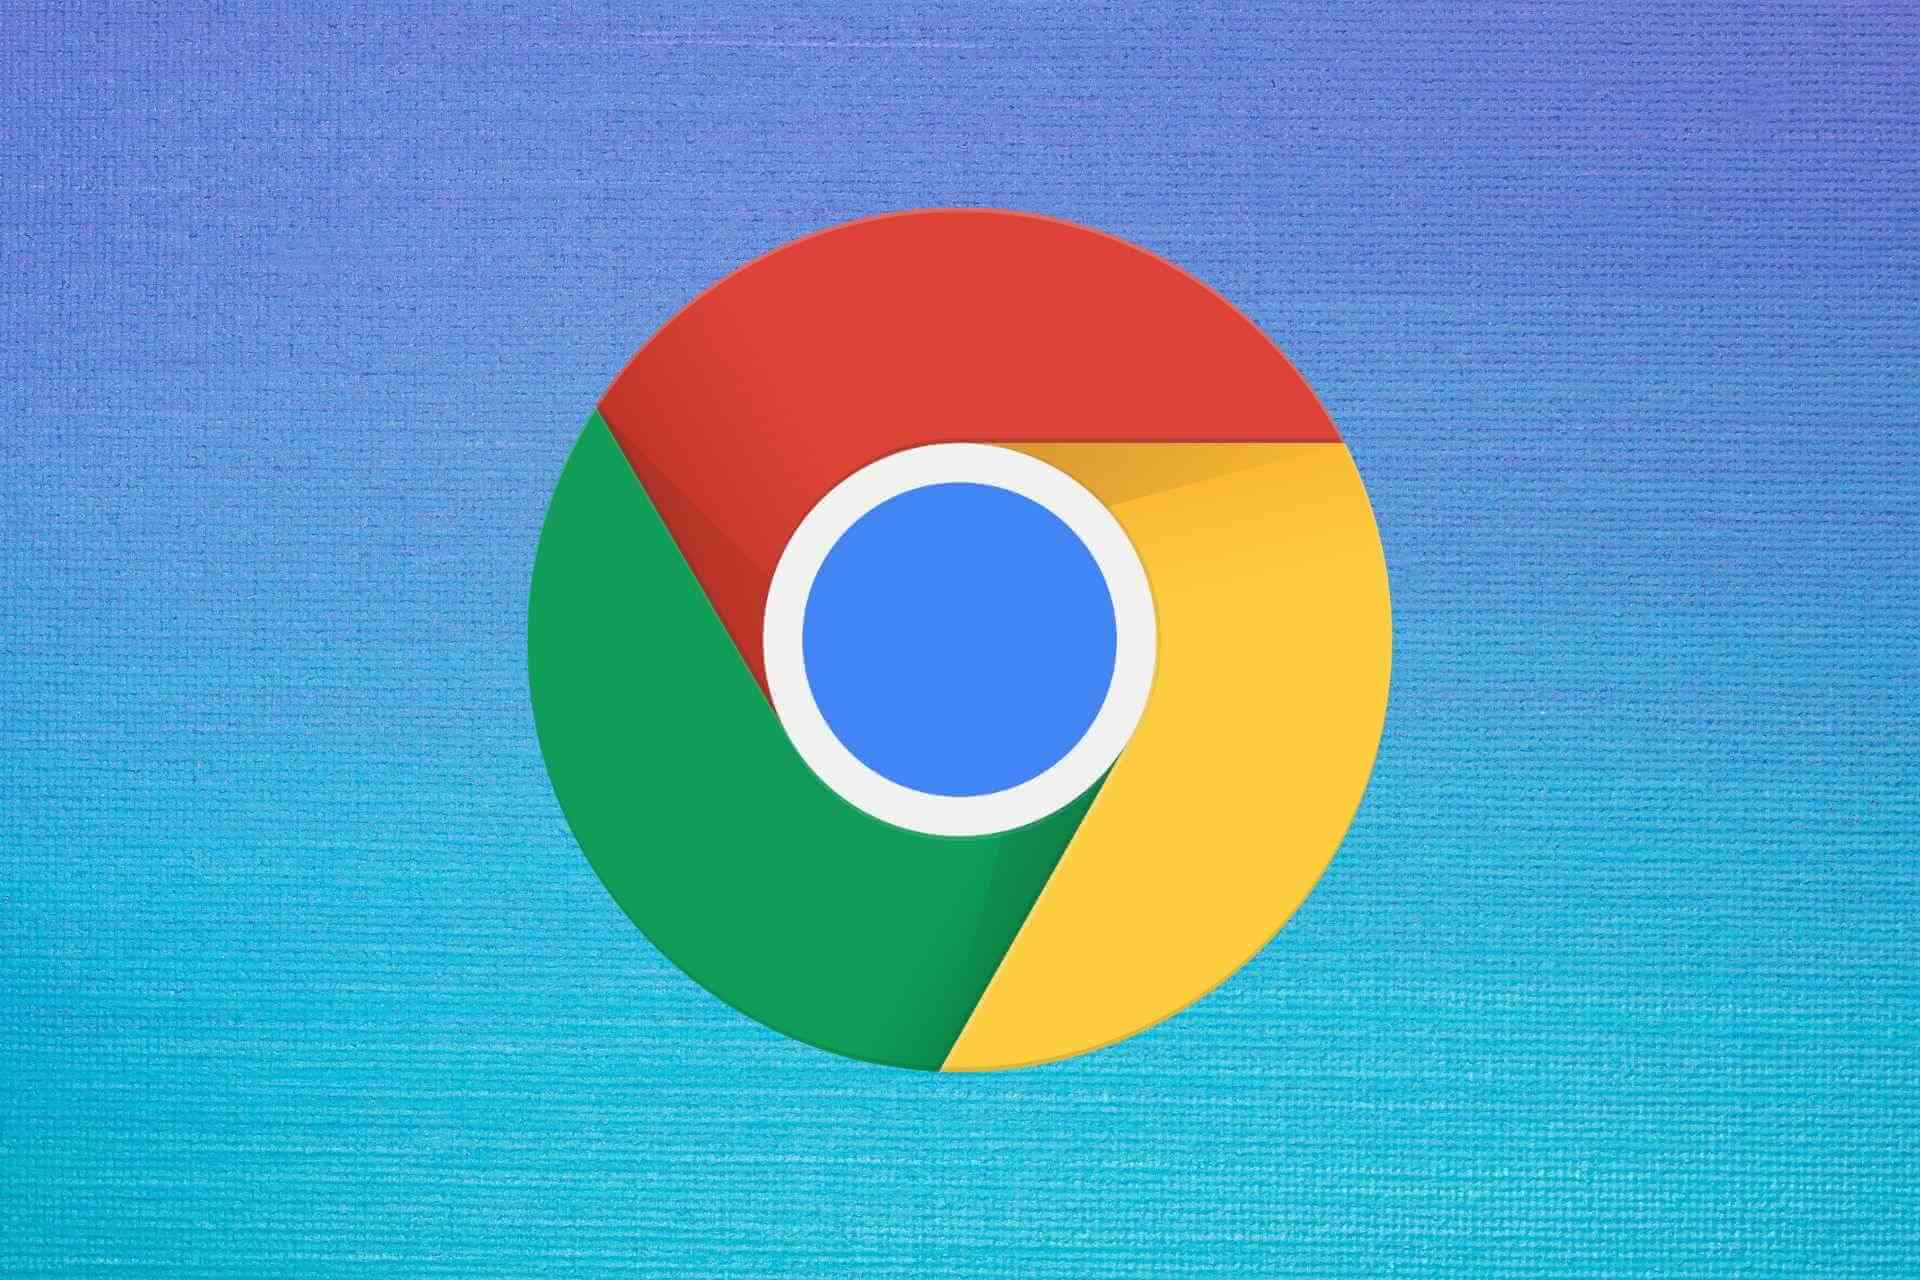 How to download & install Chrome on Windows 10 /11